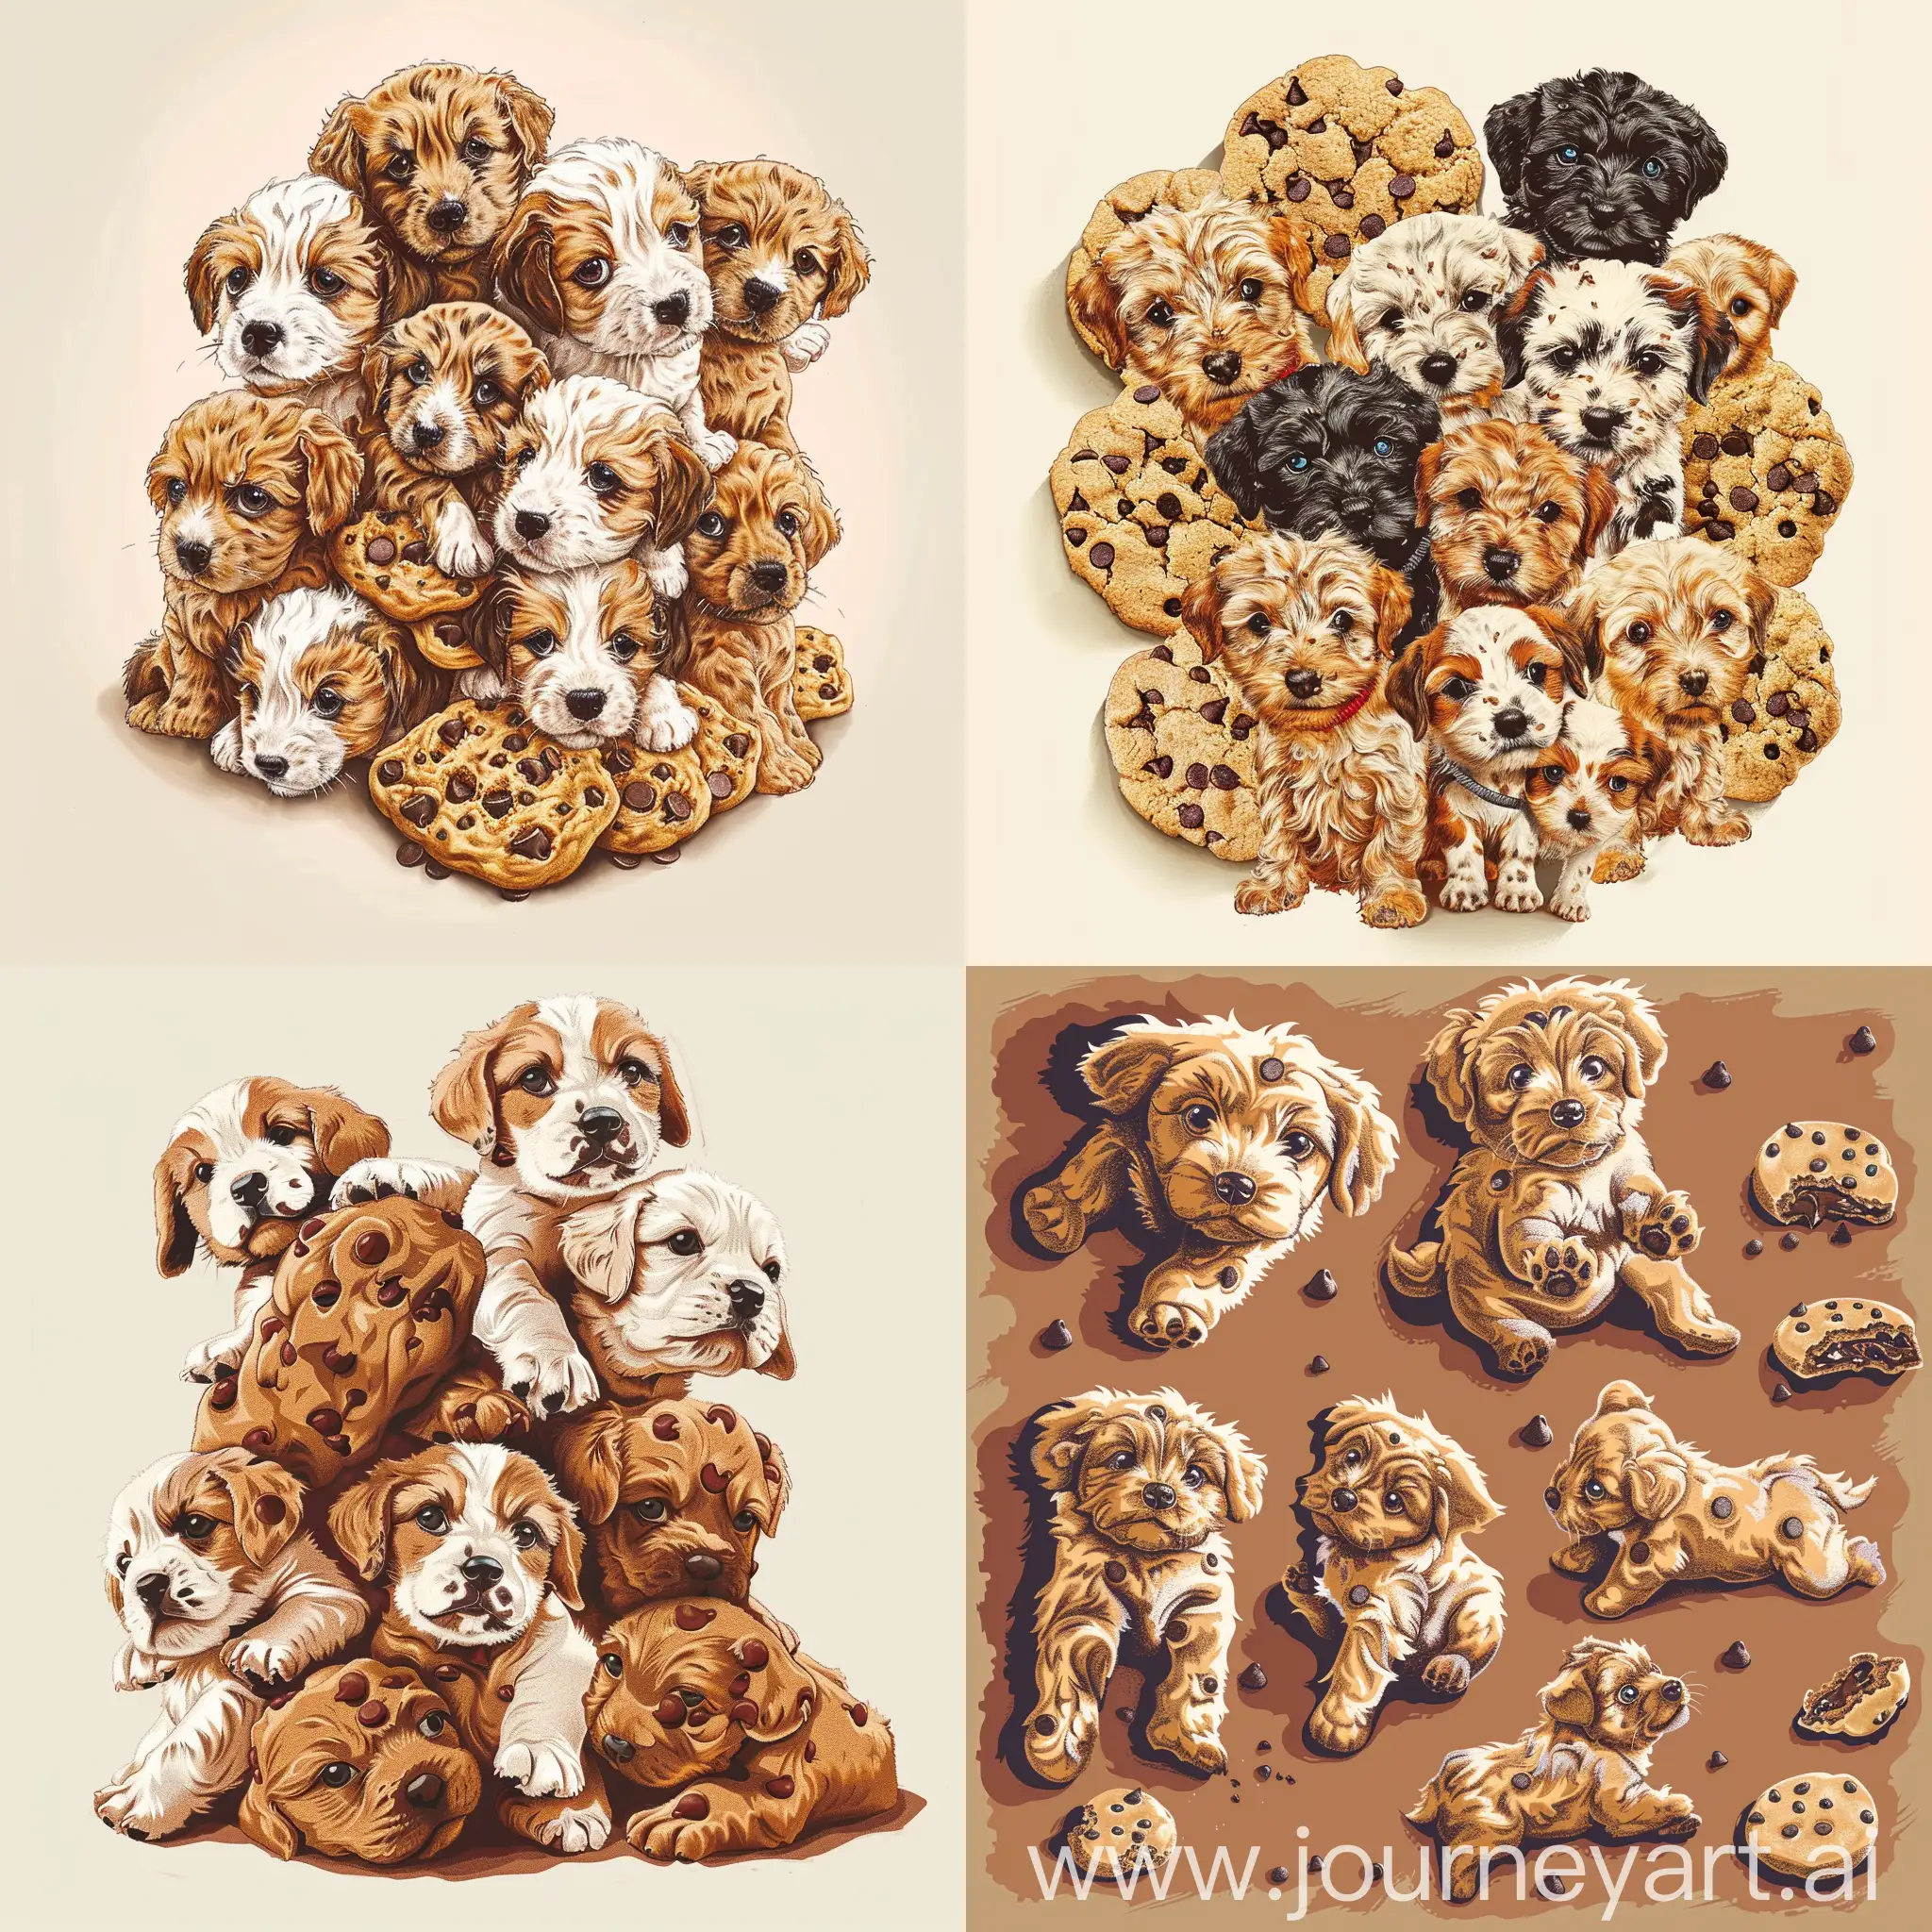 Detailed digital drawing of puppies made from chocolate chip cookies